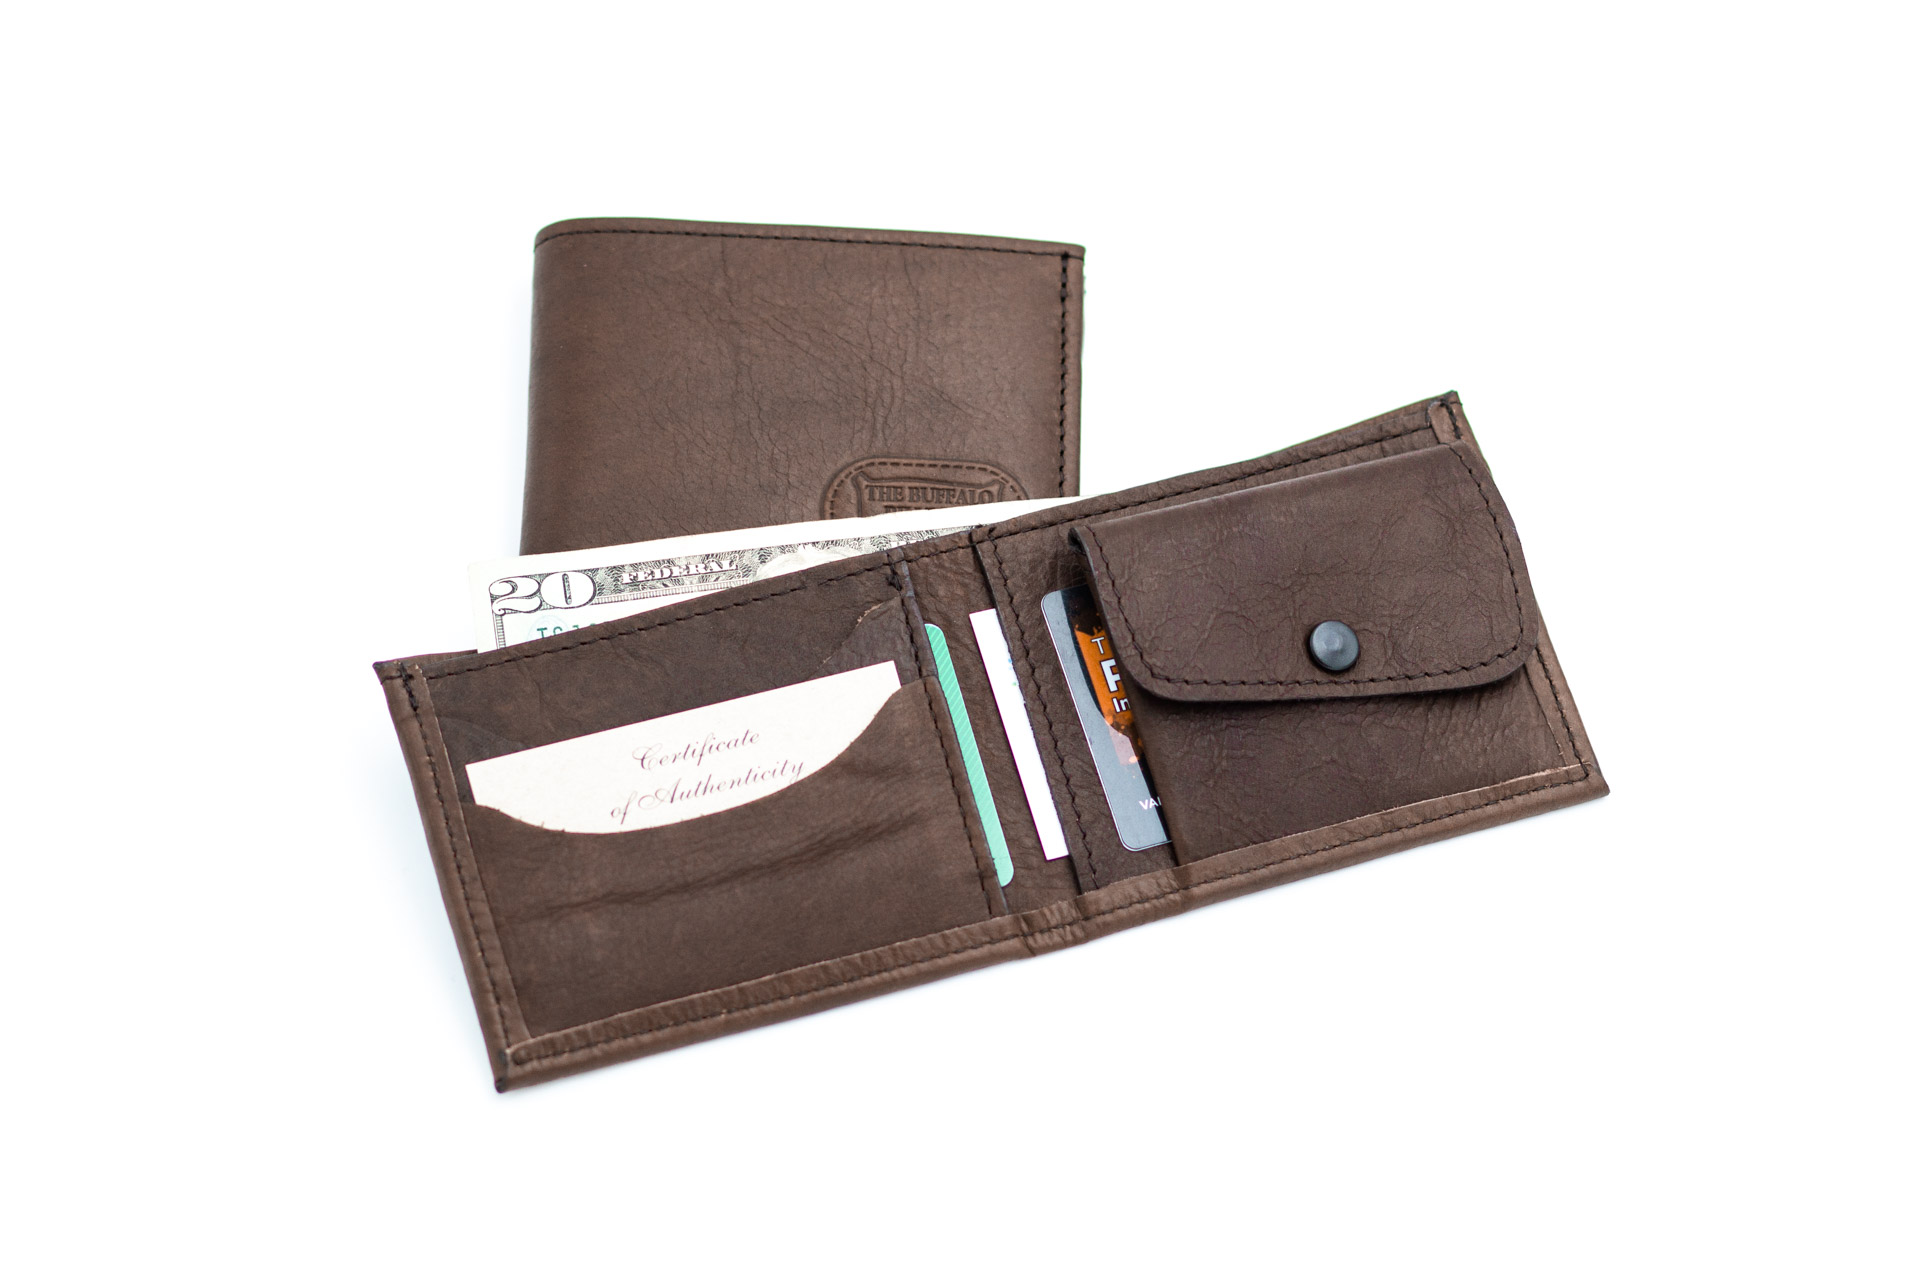 Genuine Leather Zipper Wallet with Coin Pocket